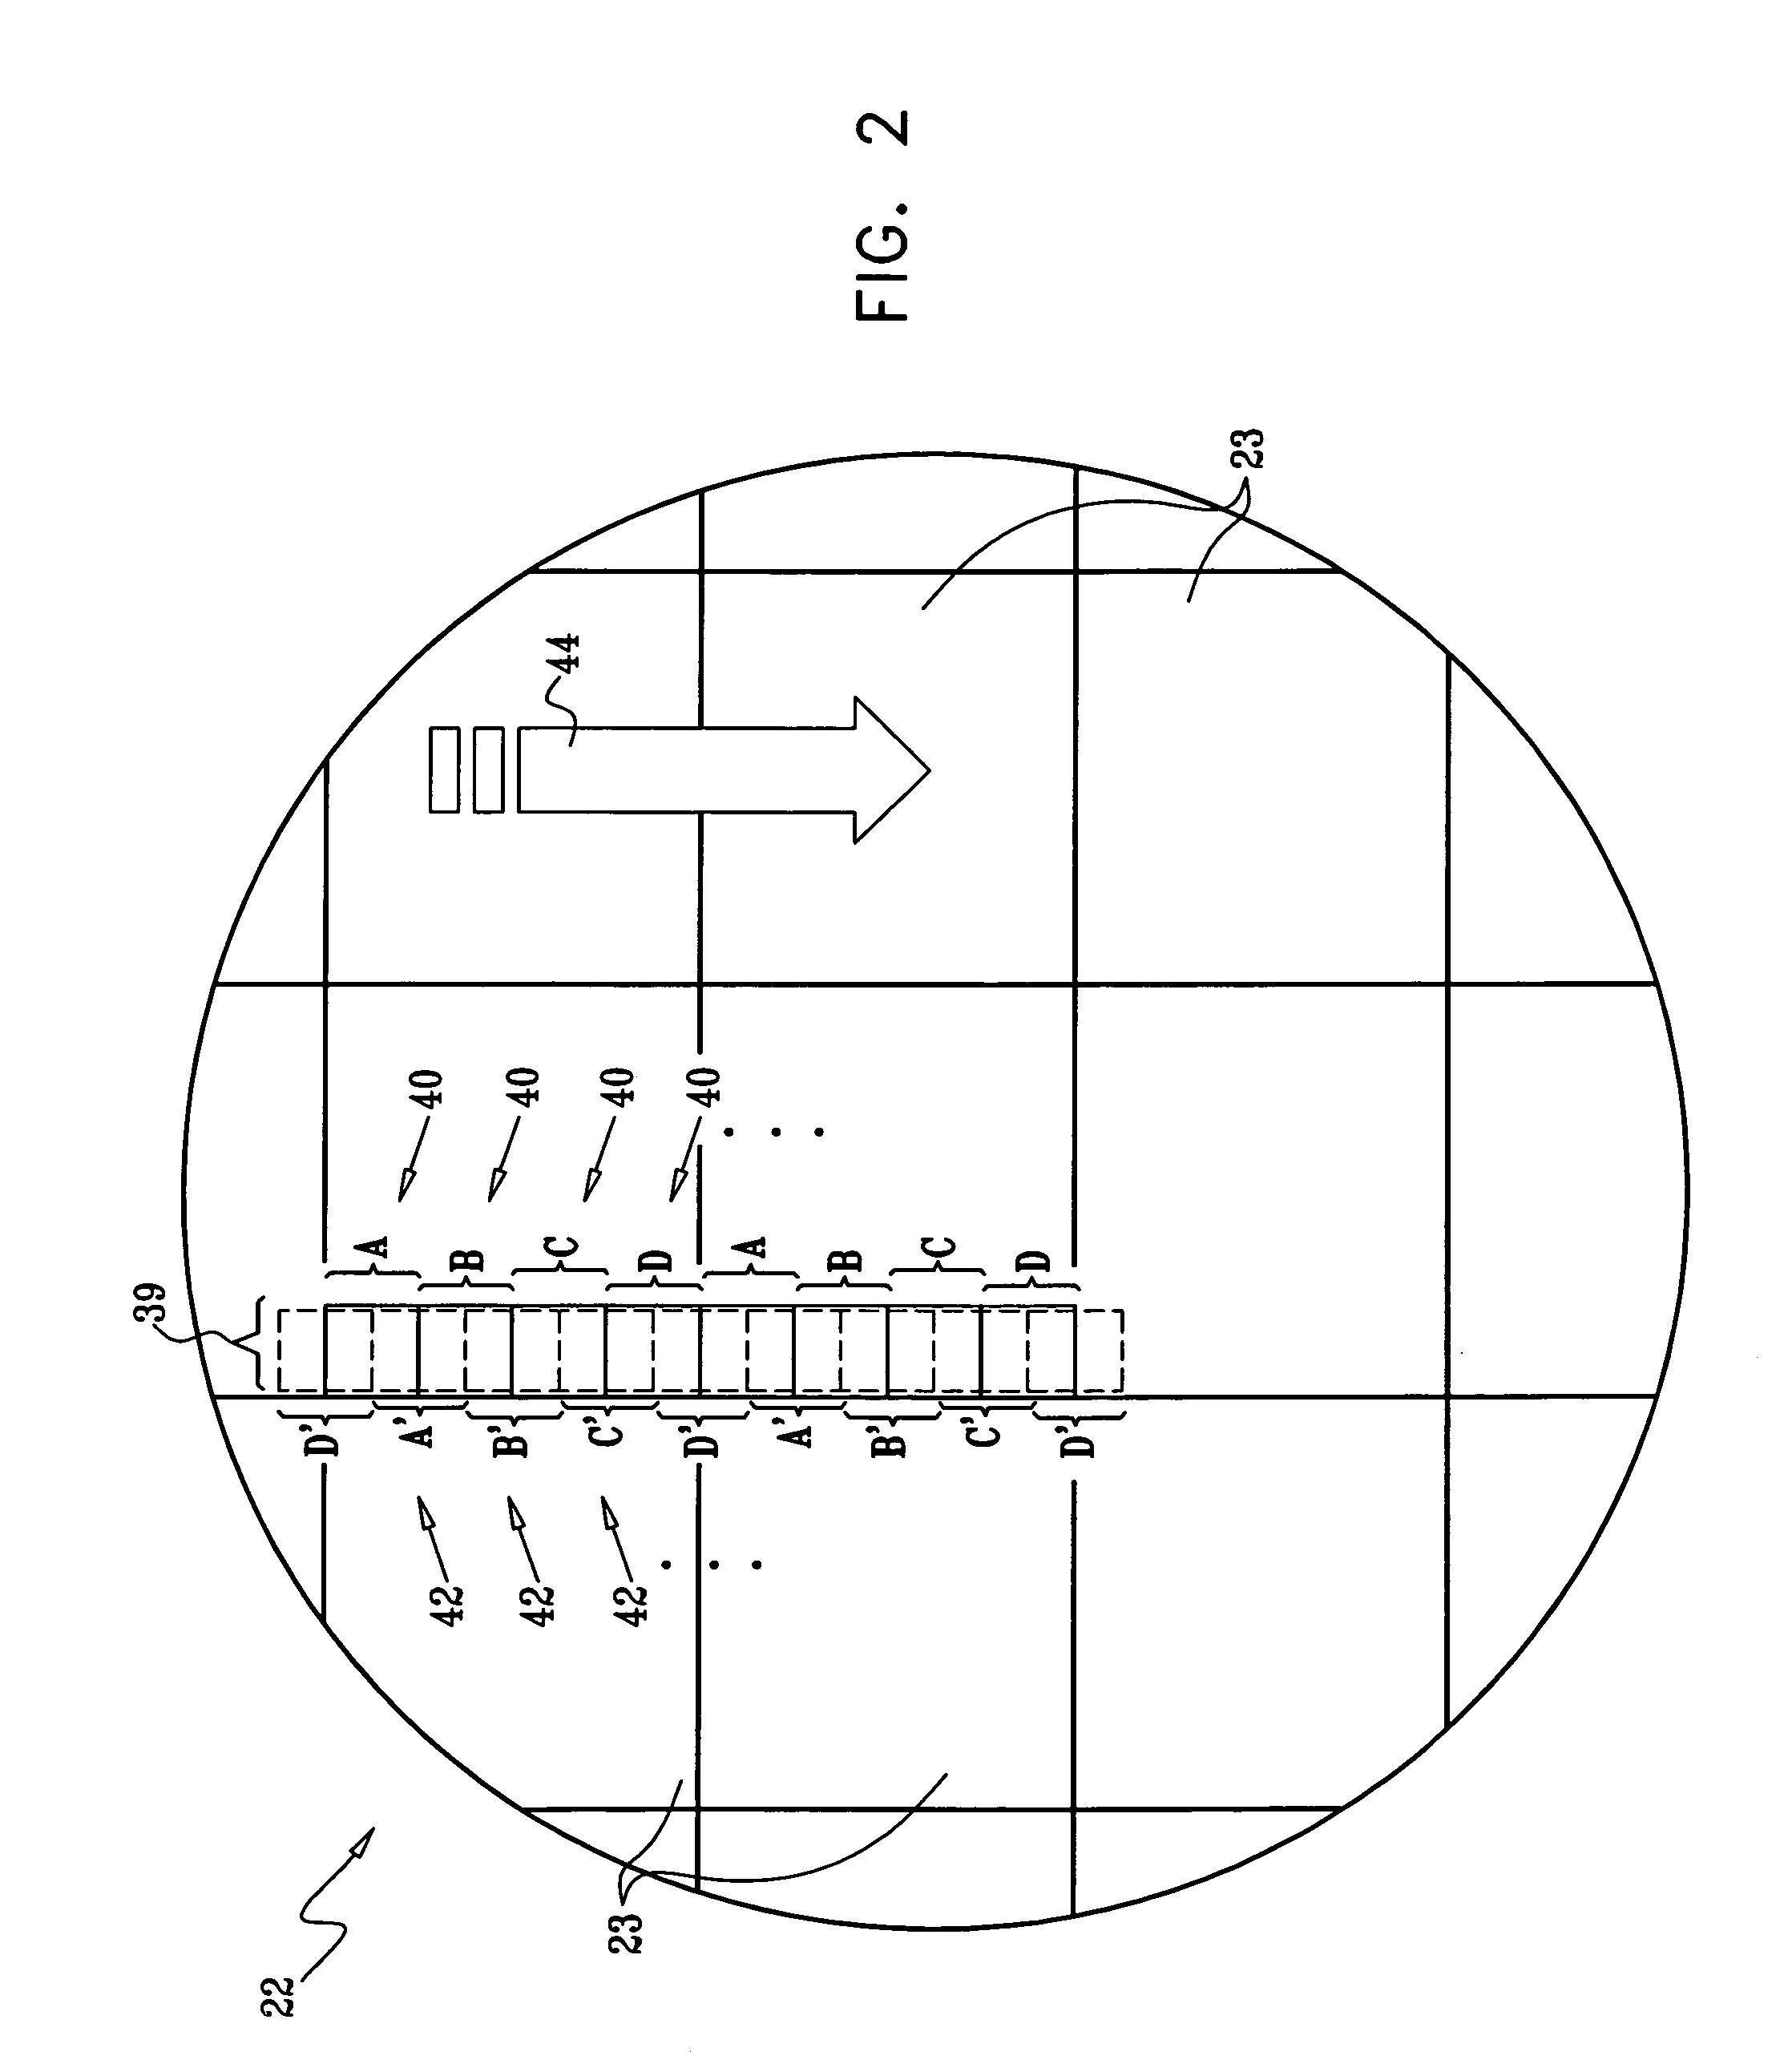 Optical inspection with alternating configurations